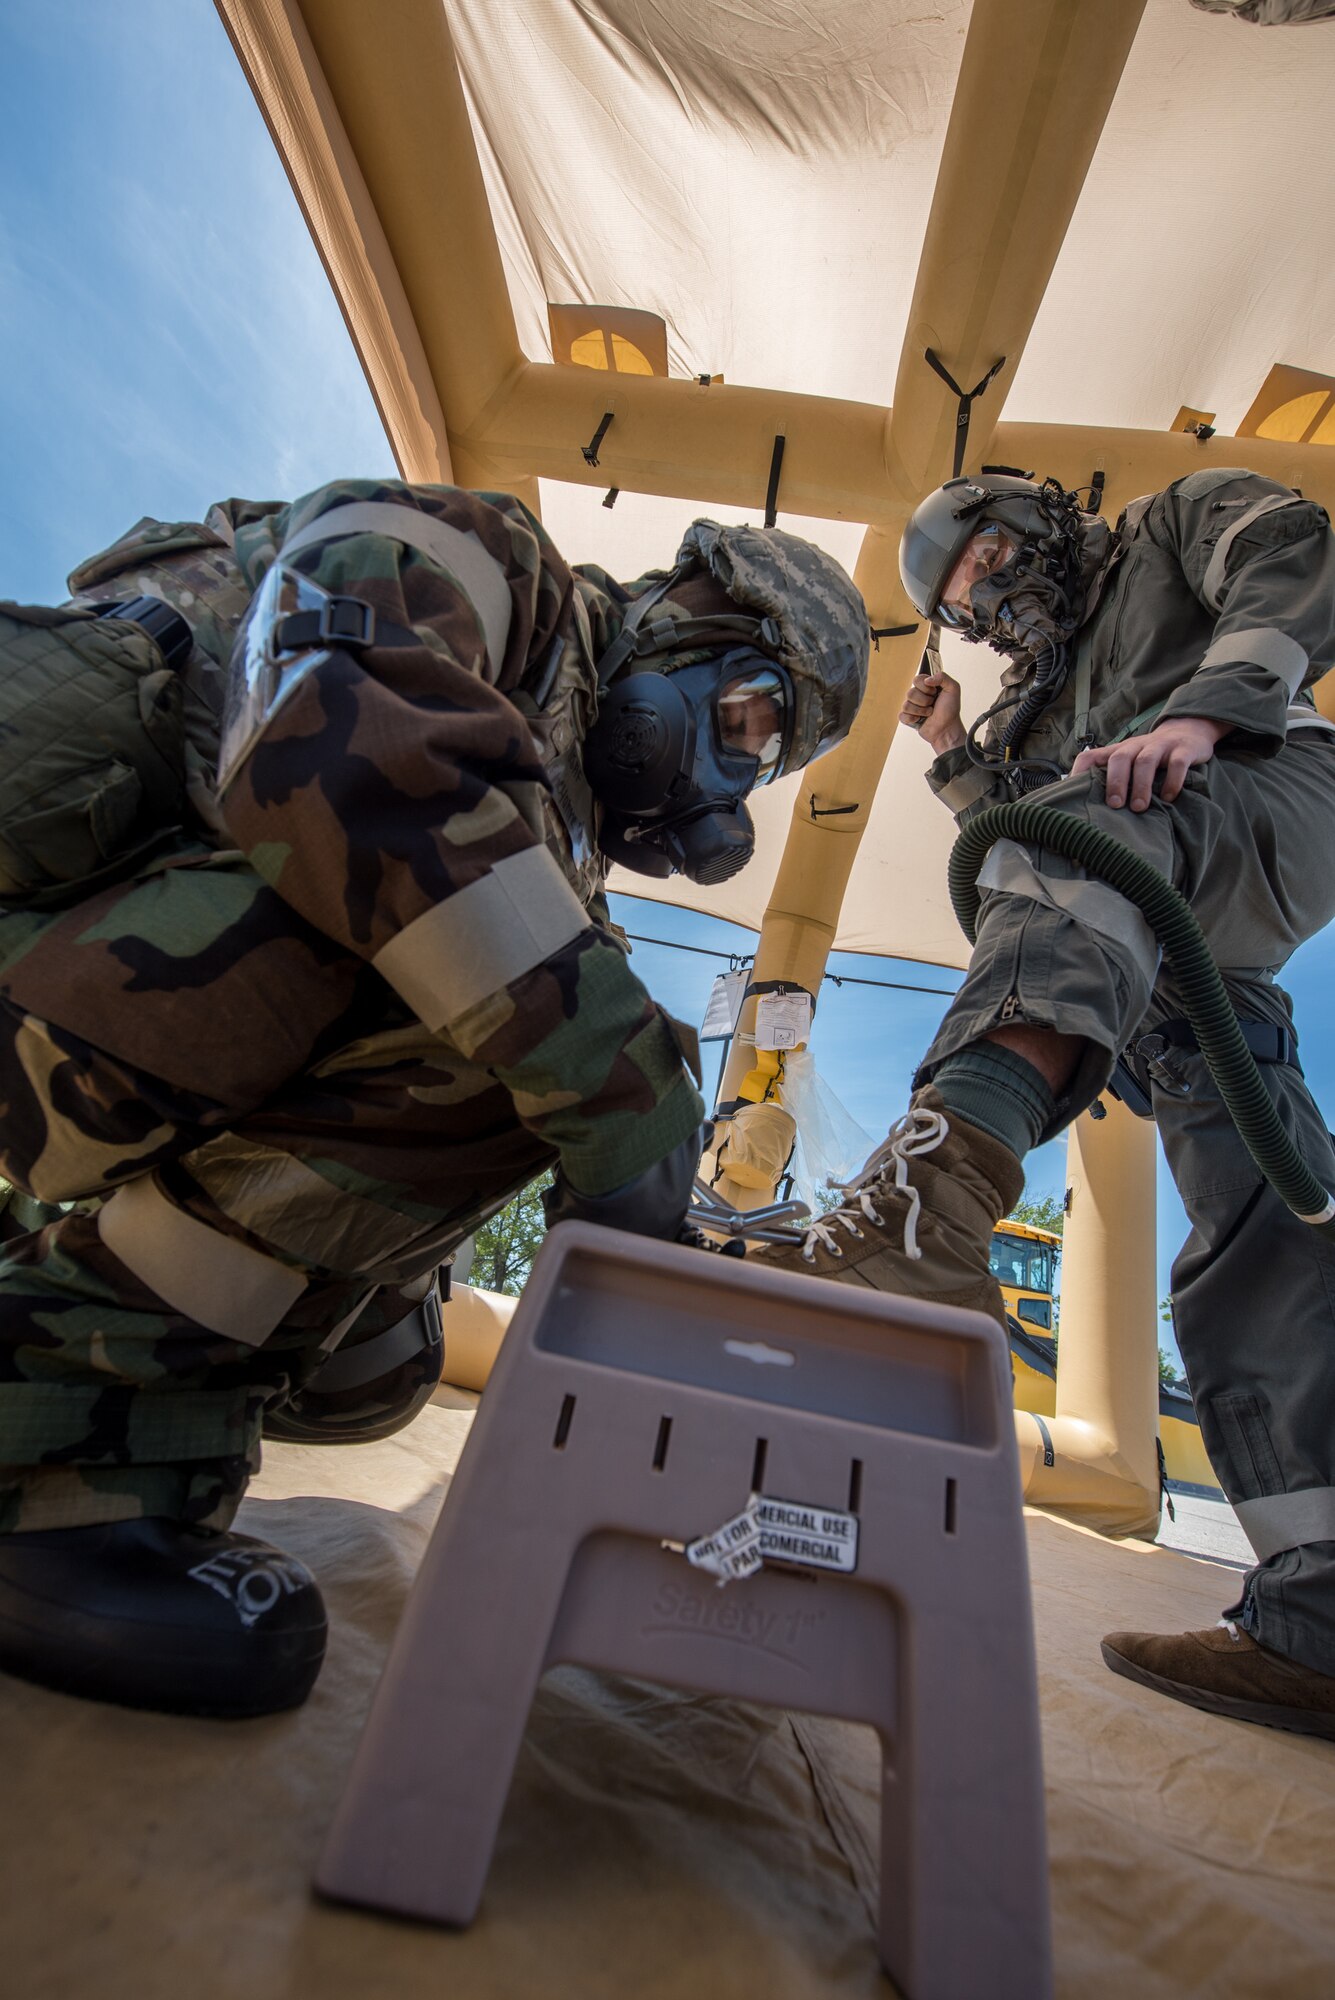 A flight equipment specialist for the Kentucky Air National Guard’s 123rd Airlift Wing assists an aircrew member at a chemical contamination control point during an exercise at the Alpena Combat Readiness Training Center in Alpena, Mich., on June 23, 2019. The exercise, called Charred Barrel, tested the wing’s ability to mobilize, fly to a remote site, and operate in a hostile environment. (U.S. Air National Guard photo by Staff Sgt. Joshua Horton)